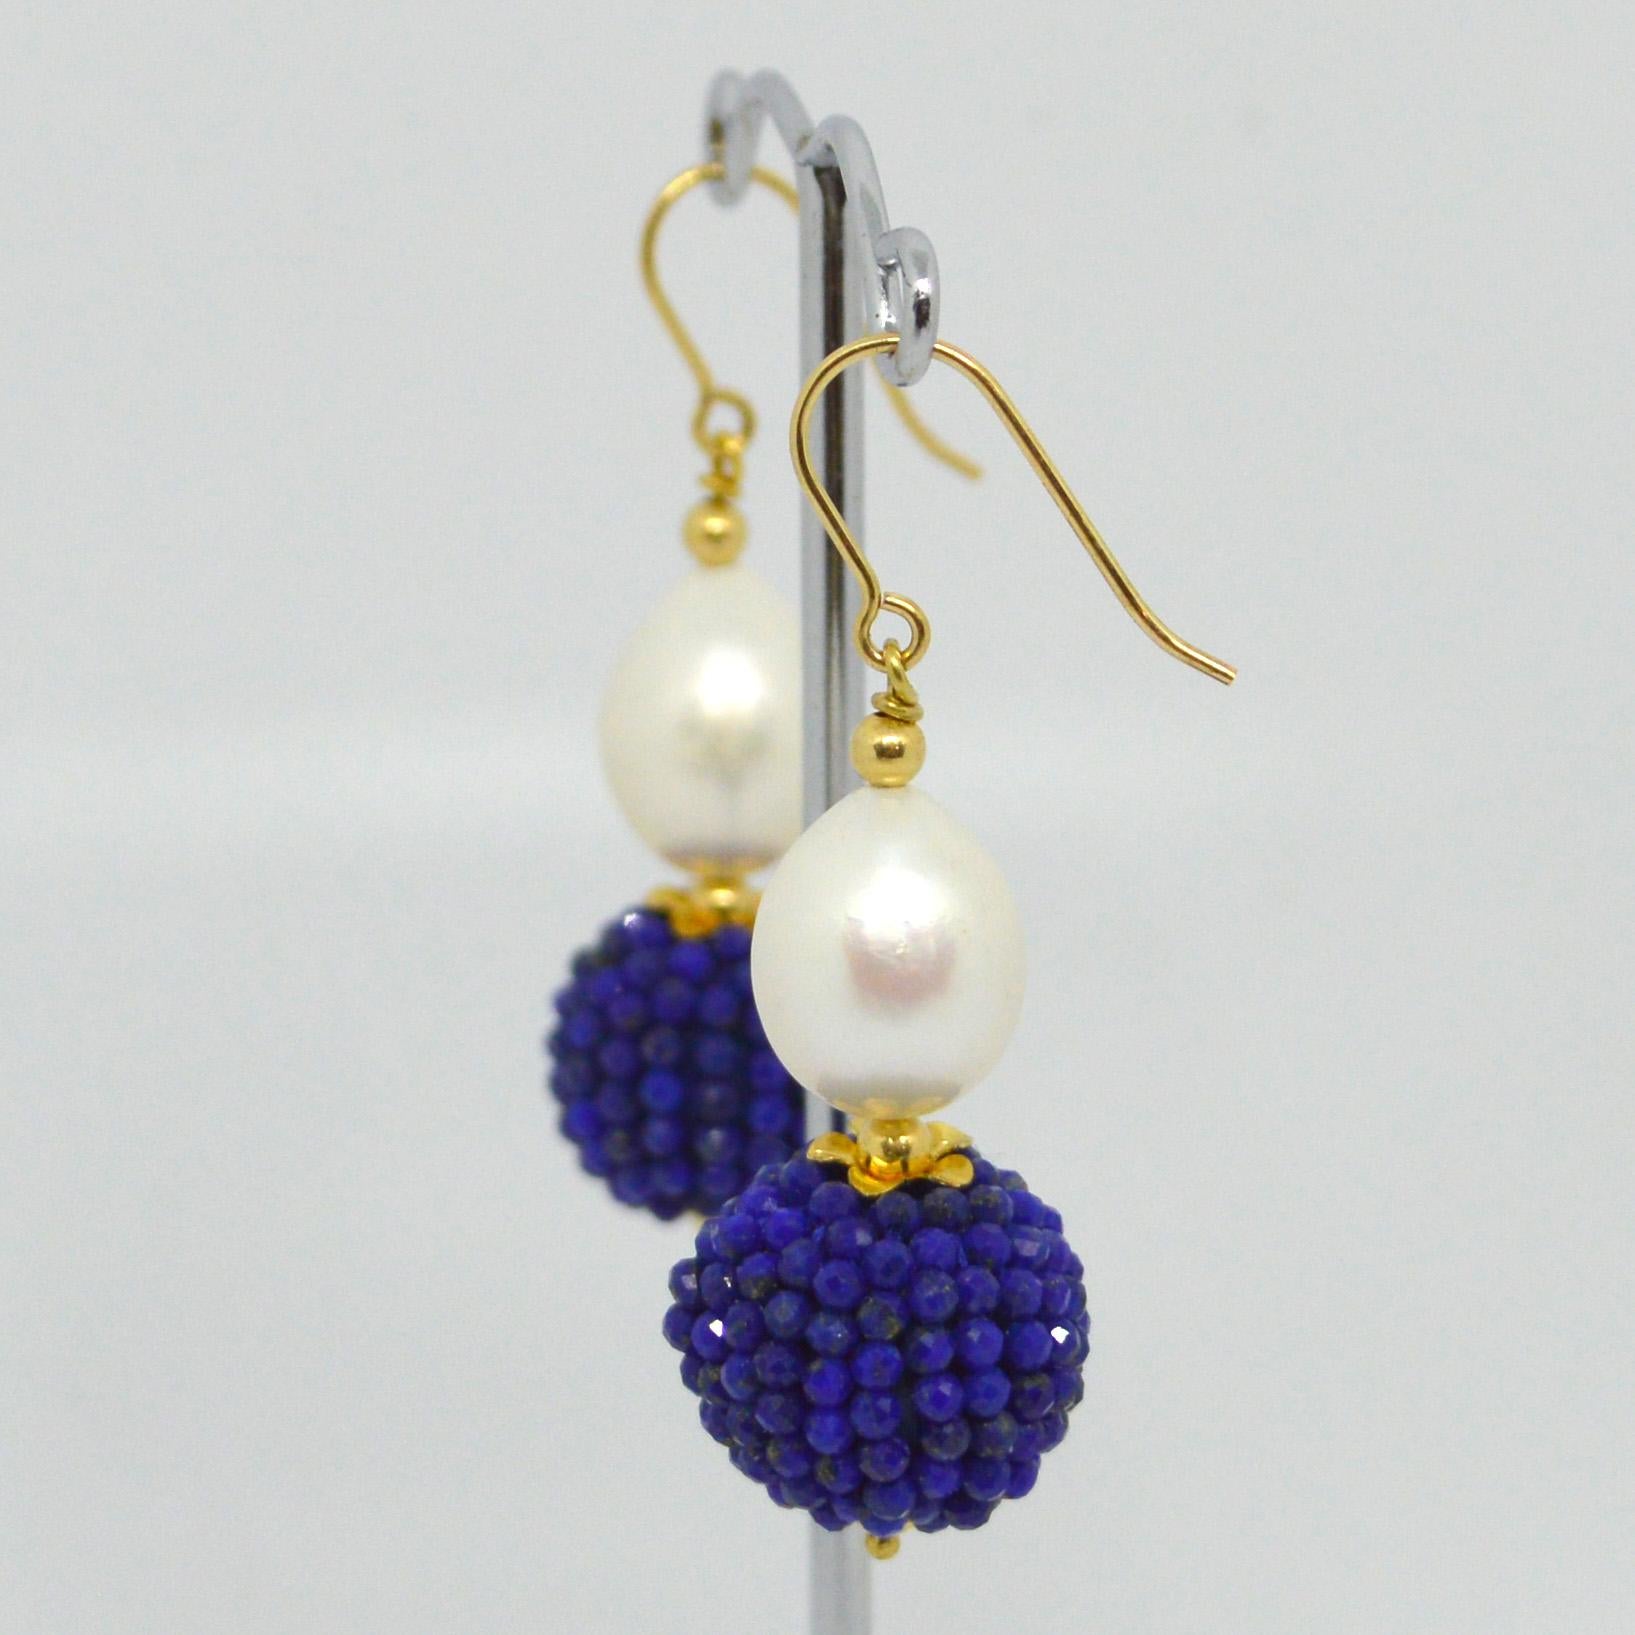 Natural Freshwater Pearl 15x10mm with a hand made beaded bead of natural Lapis Lazuli mirco faceted beads 14k Gold Filled headpin and 3mm beads and Sheppard.

Total Earring length 48mm.
